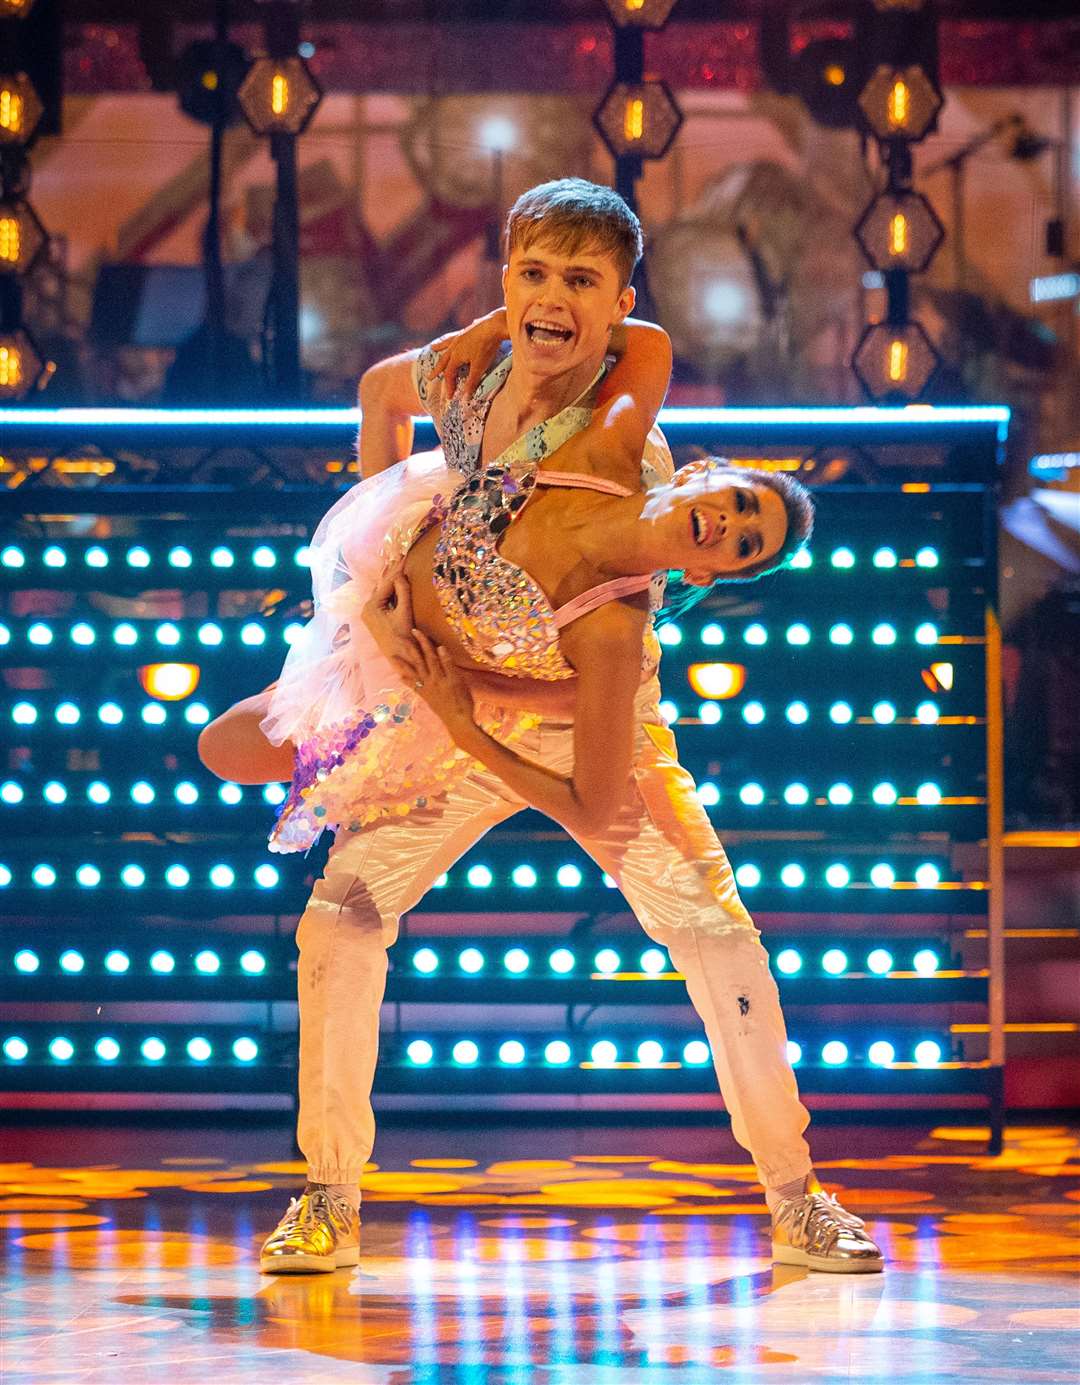 HRVY and partner Janette Manraraon Strictly Picture: BBC - Photographer: Guy Levy